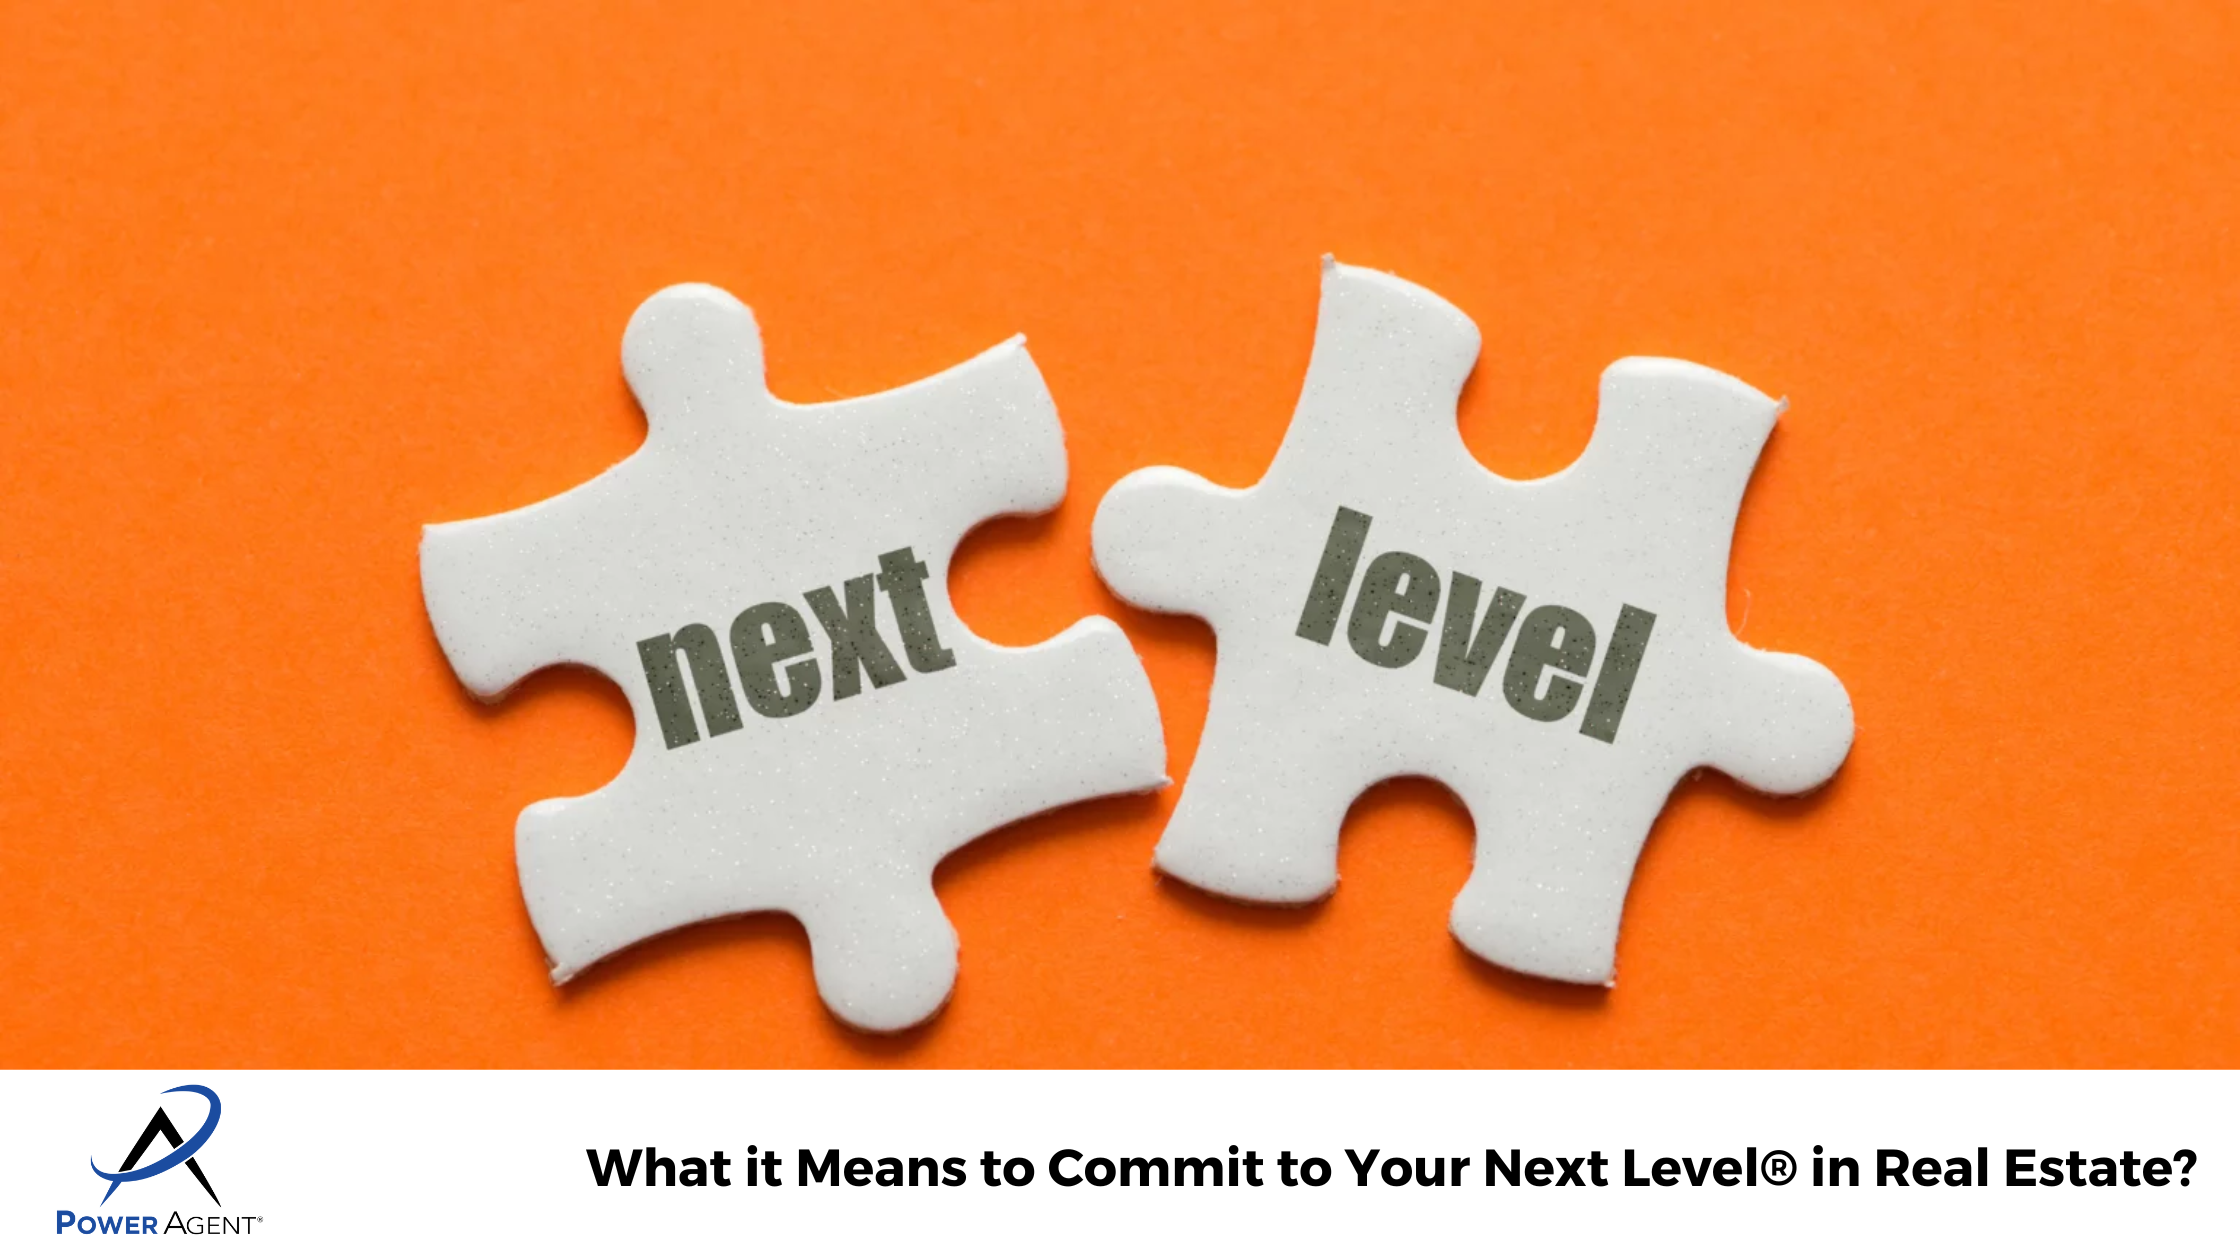 What it Means to Commit to Your Next Level® in Real Estate?